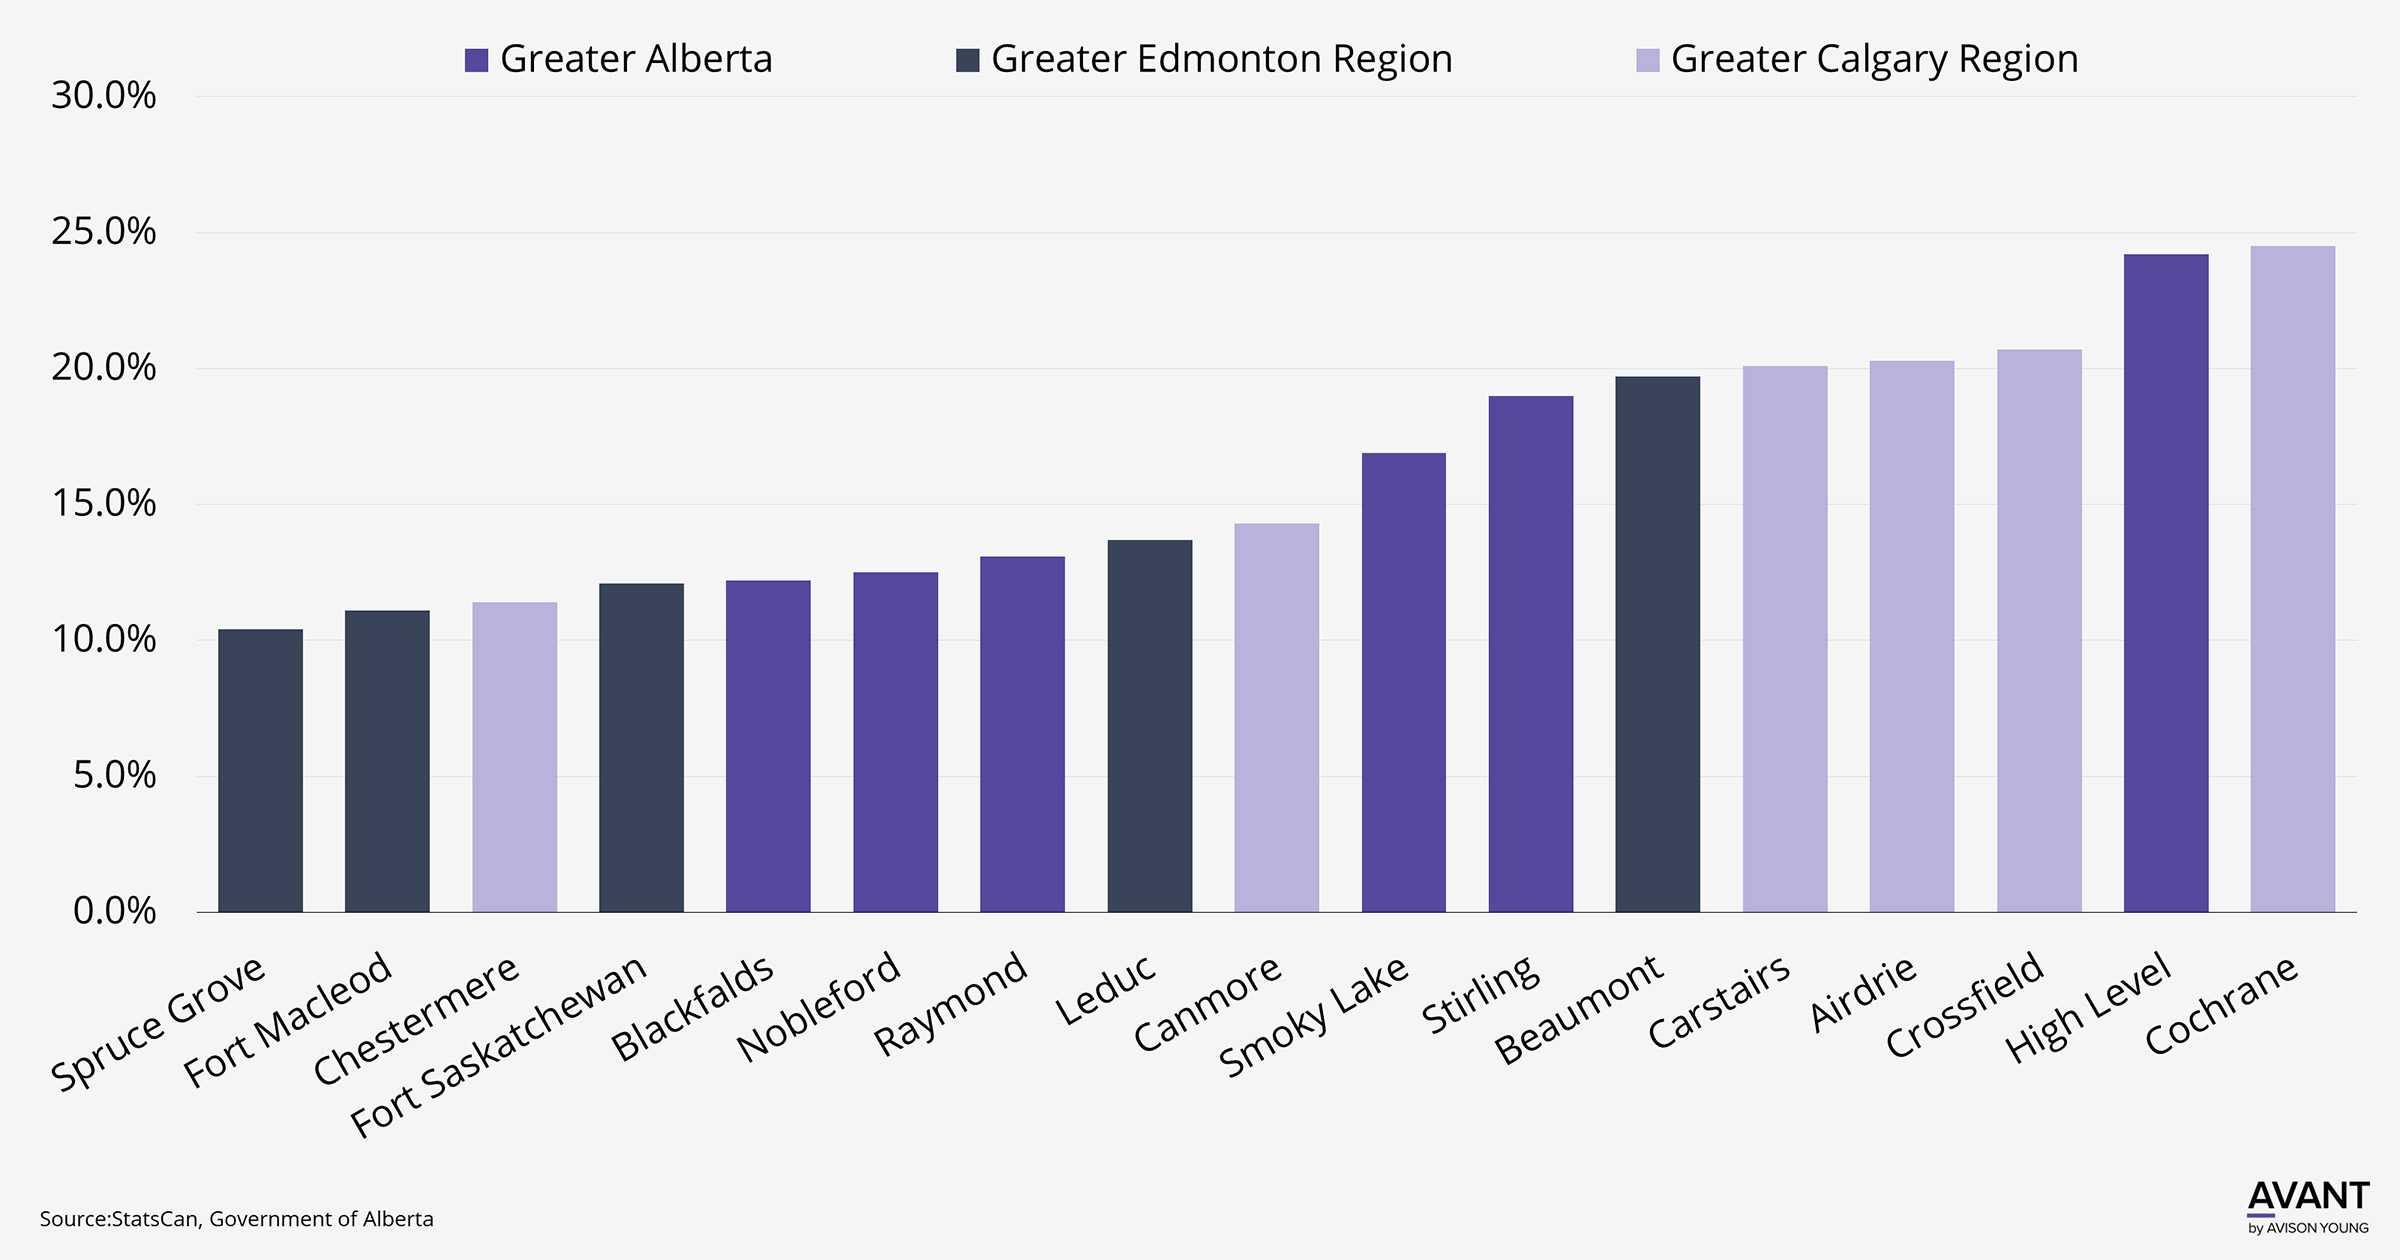 Small cities and towns in Alberta experience double digit population growth